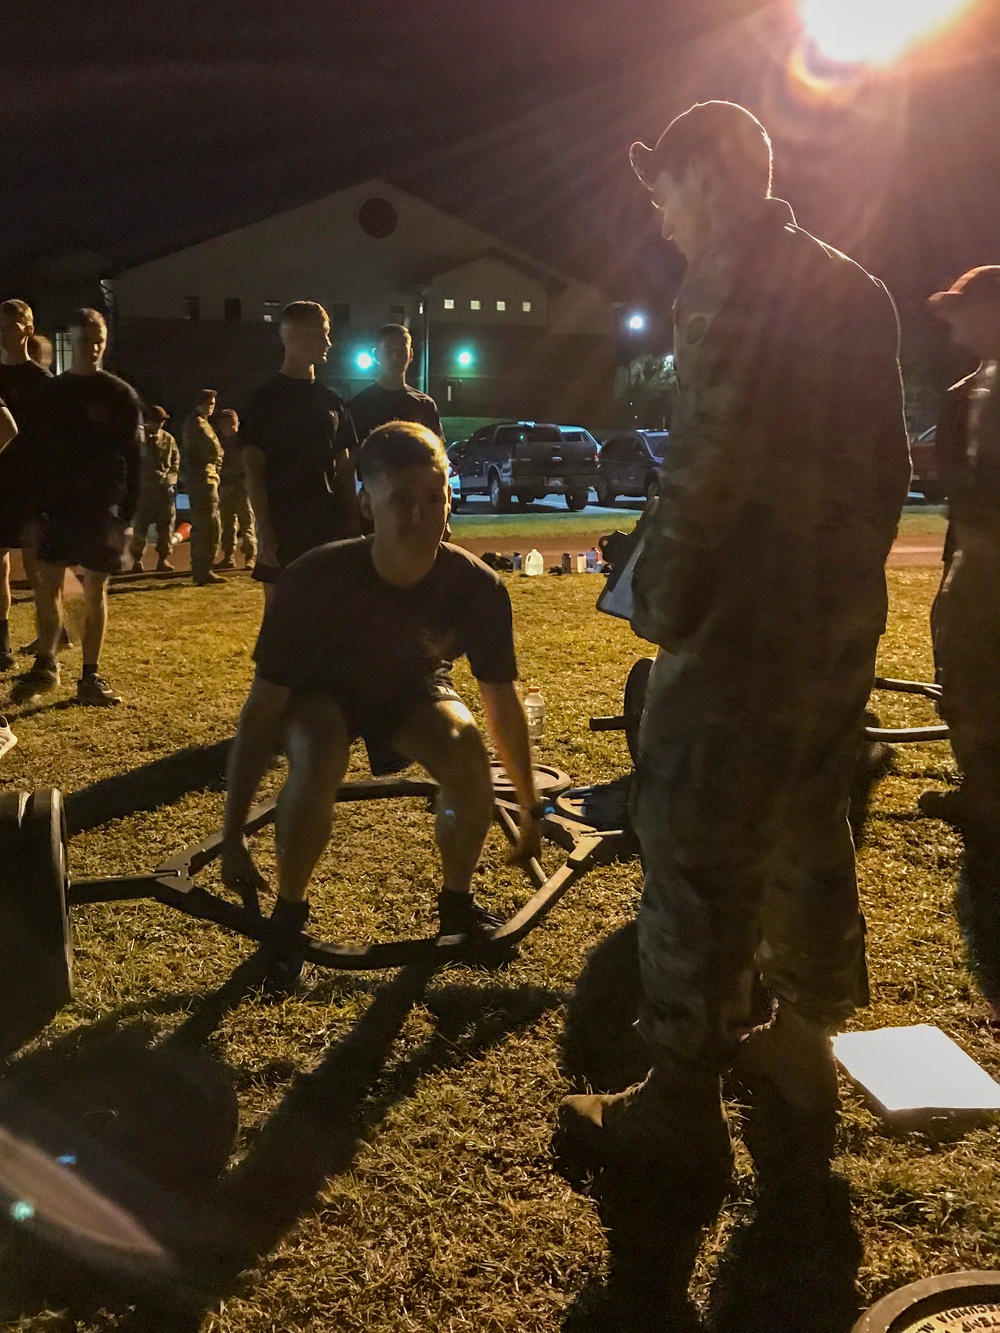 Best of the Best kicks off with Army Combat Fitness Test